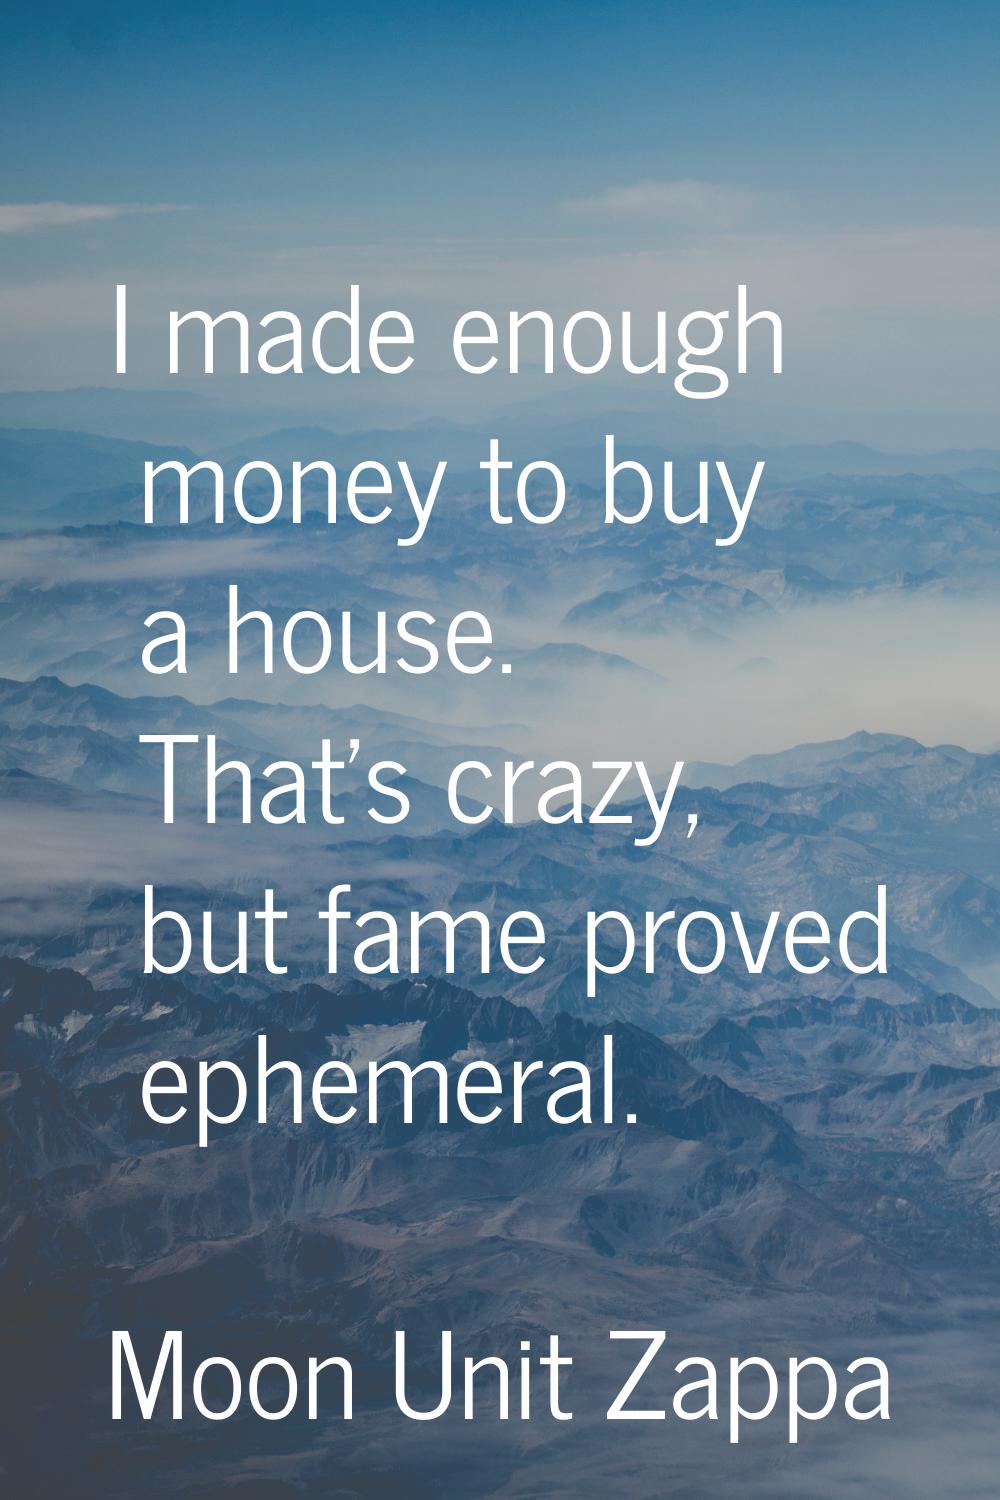 I made enough money to buy a house. That's crazy, but fame proved ephemeral.